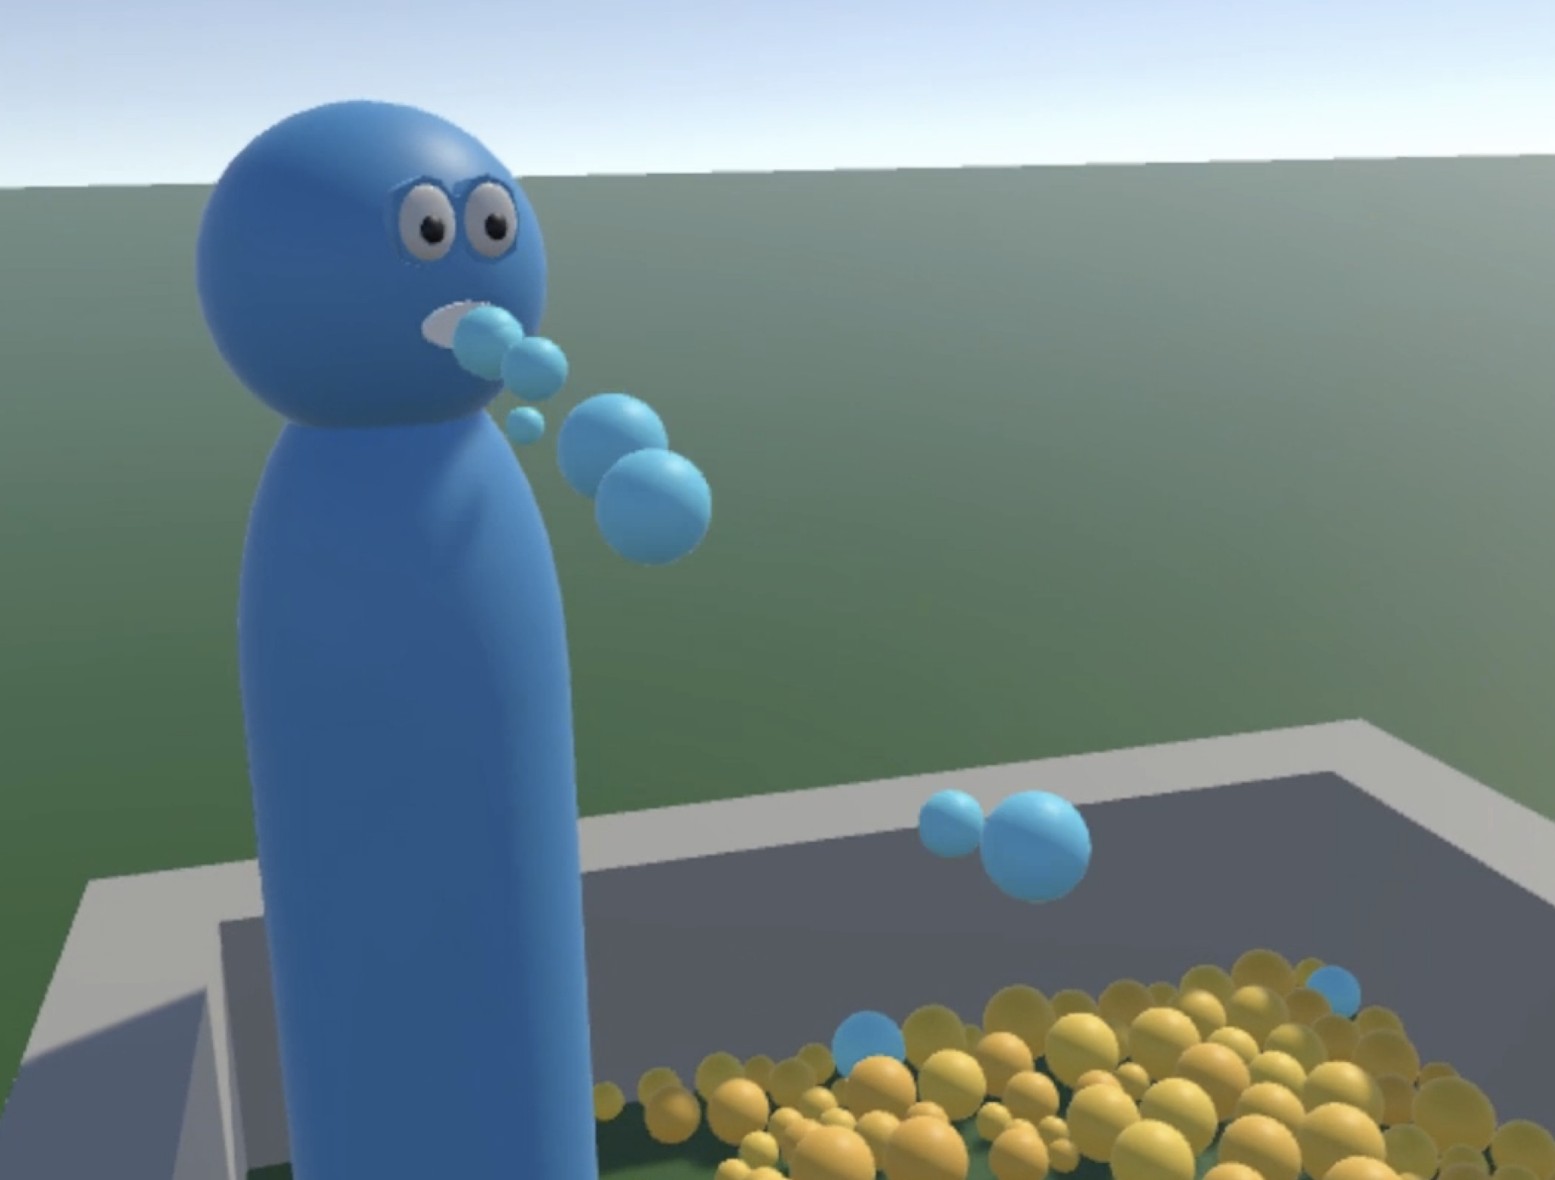 Screenshot of a weird social VR sandbox, focused on a tall blue user avatar. The avatar has googly eyes and spits blue orbs from its open mouth as the user speaks.